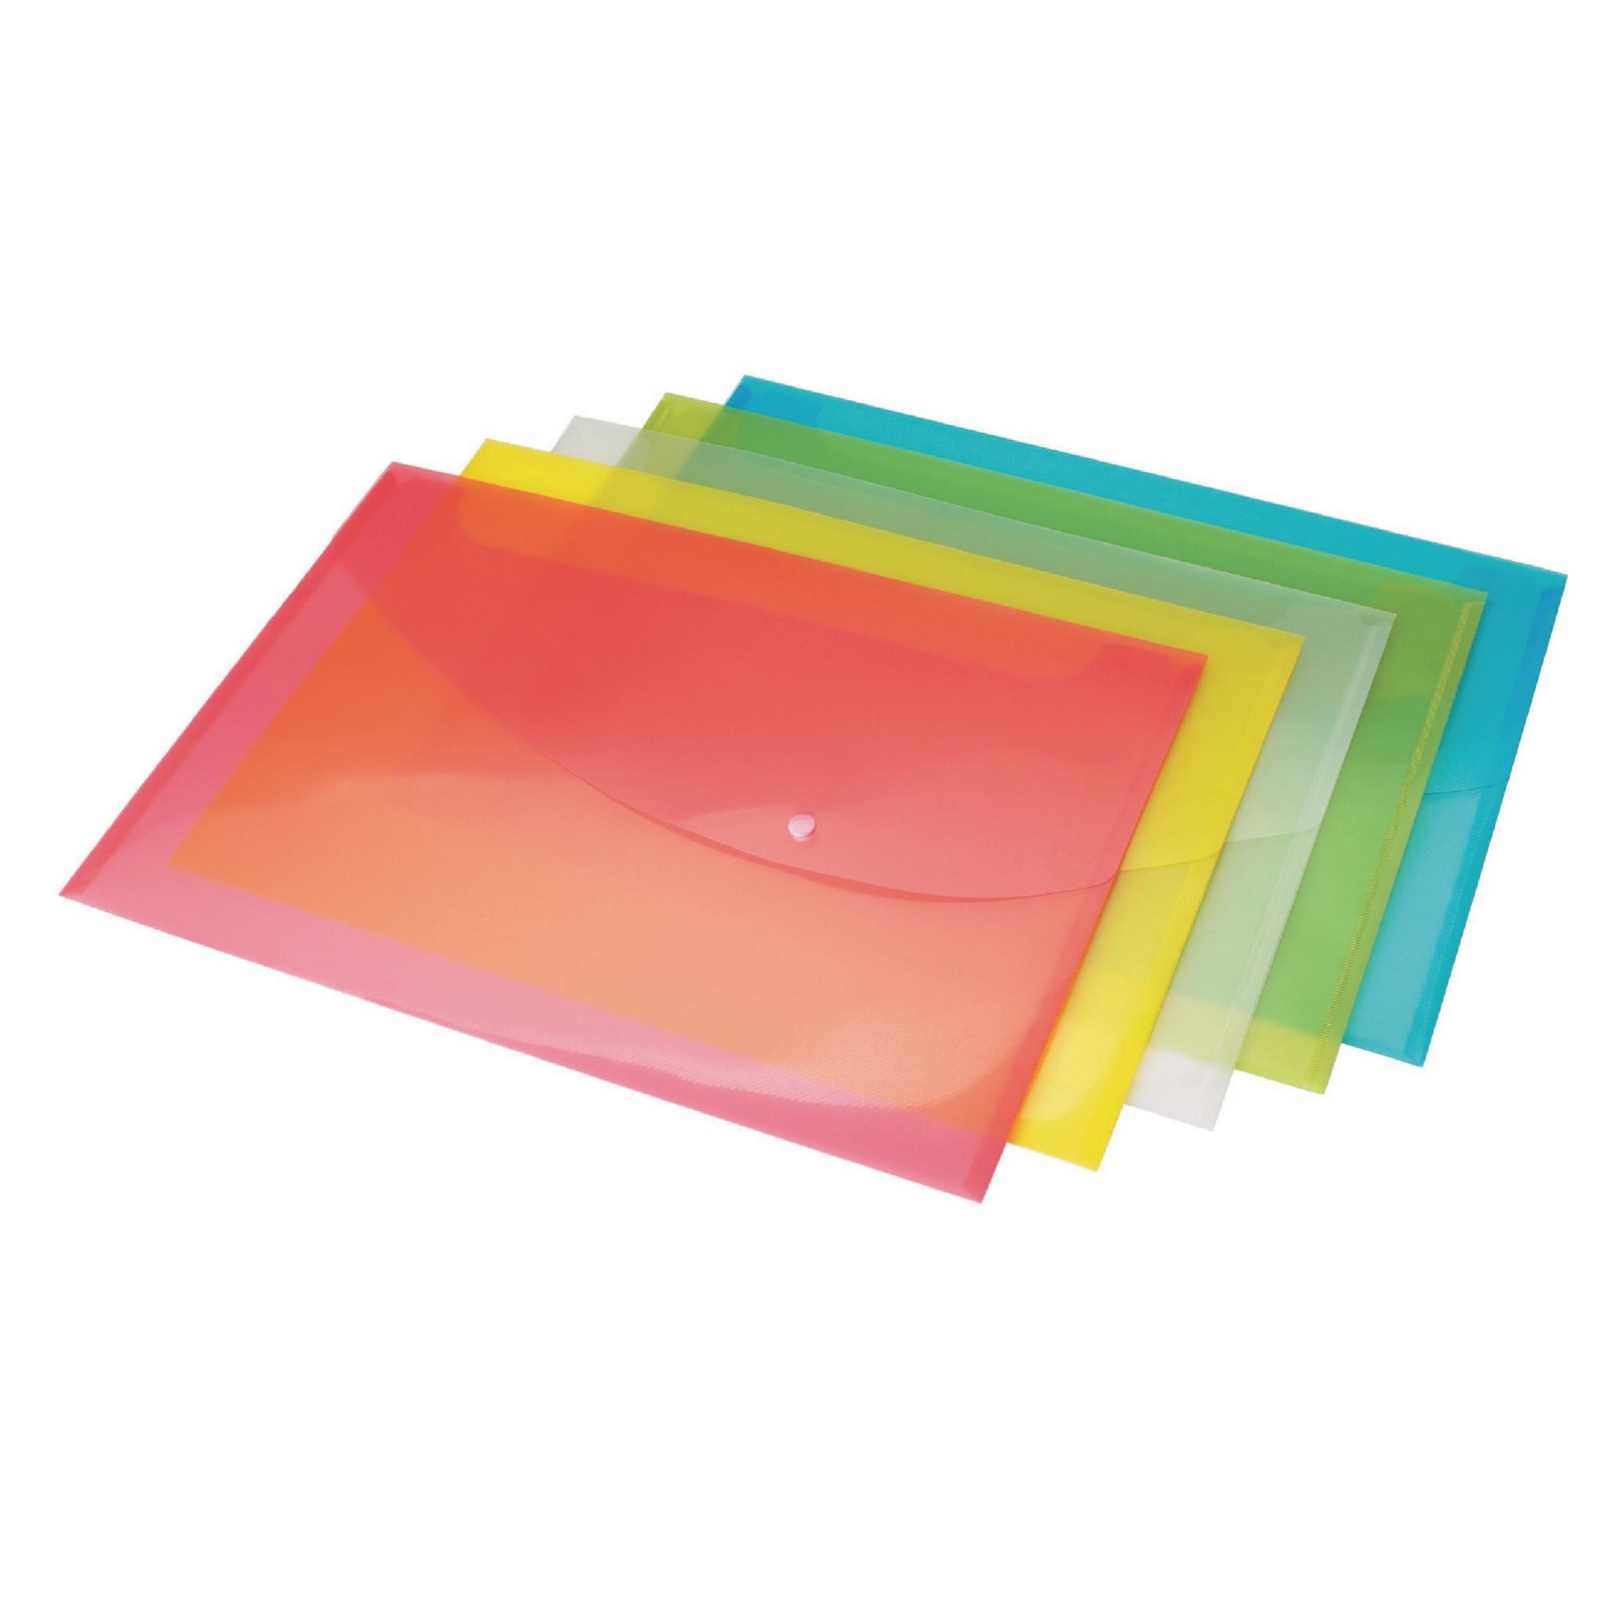 Rapesco Popper Wallet A5 Assorted Brights - Pack of 5